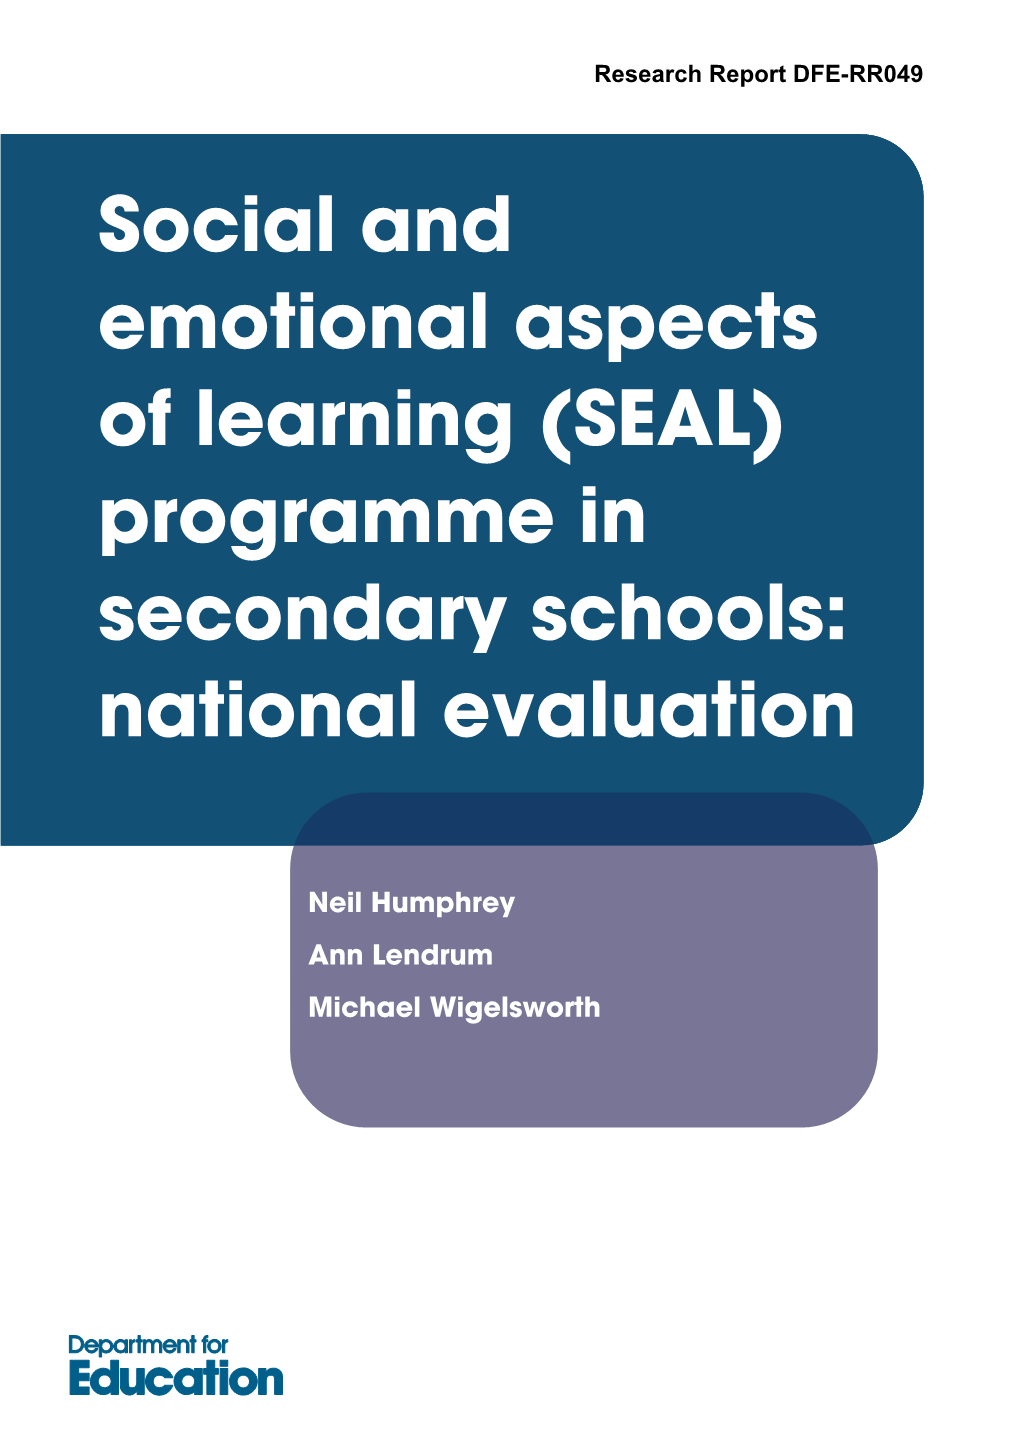 (SEAL) Programme in Secondary Schools: National Evaluation